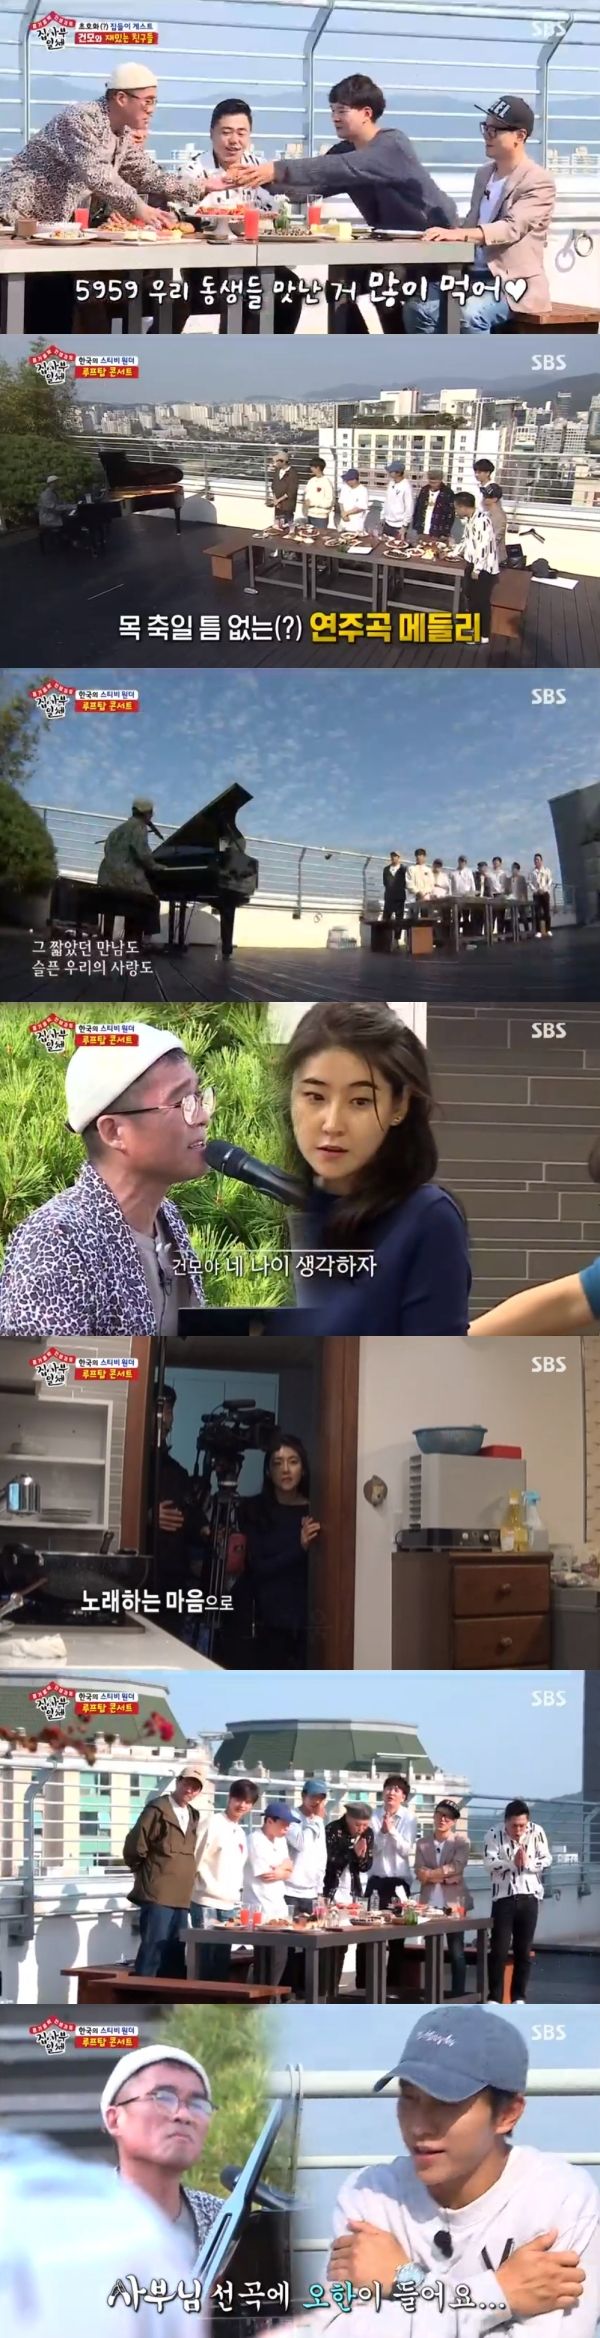 Kim Gun-mo hits housewarming guest with Piano performanceOn the 10th SBS All The Butlers, Lee Sang-yoon X Lee Seung-gi X Yang Se-hyeong X Yook Sungjae, who welcomed the new groom Kim Gun-mo as a master, started preparing for Housewarming.On this day, the members helped Kim Gun-mo and moved to a neighbors house.Kim Gun-mo said, Please have a delicious rice cake, and Lee Seung-gi said, Kim Gun-mo has moved here. Thank you for your understanding.Neighbors welcomed Kim Gun-mo, saying Welcome.Kim Gun-mo, who entered the honeymoon house, brought out Melodian as a music theory class to the members.Yook Sungjae said, I get this lesson from Master Kim Gun-mo.Kim Gun-mo handed Melodian to Yook Sungjae, and after listening to the performance, he taught breathing.Kim Gun-mo said, At first, I was a hobby, but when I came to my head, I would like to play music.In addition, Lee Sang-yoon and Kim Gun-mos Excuse melody concert continued. Lee Seung-gi showed vocals tailored to the two performances.They finished the song with self-congratulations and laughed.Yang Se-hyeong challenged Housewarming cuisine; Yang Se-hyeong, who entered the kitchen, taught Lee Sang-yoon how to trim paprika.Yang Se-hyeong encouraged with praise, while laughing with the playful words: Its an act of cutting quickly and trying to be praised by me: get down.Kim Gun-mo praised the twos Housewarming dishes for sugar is appropriate, while Yang Se-hyeong laughed, saying I didnt get sugar.Lee Sang-yoon, who helped Yang Se-hyeong cook, added that the type is a rash.Kim Gun-mo responded to these dishes with a looptop concert.Yang Se-hyeong said to Kim Gun-mos Piano performance, I have suffered for two days to listen to this.Lee Seung-gi sang with Kim Gun-mo and exchanged lyrics, and applied for a sorry performance.Kim Gun-mo was applauded for showing his song for the preliminary bride Jang Ji-yeon.